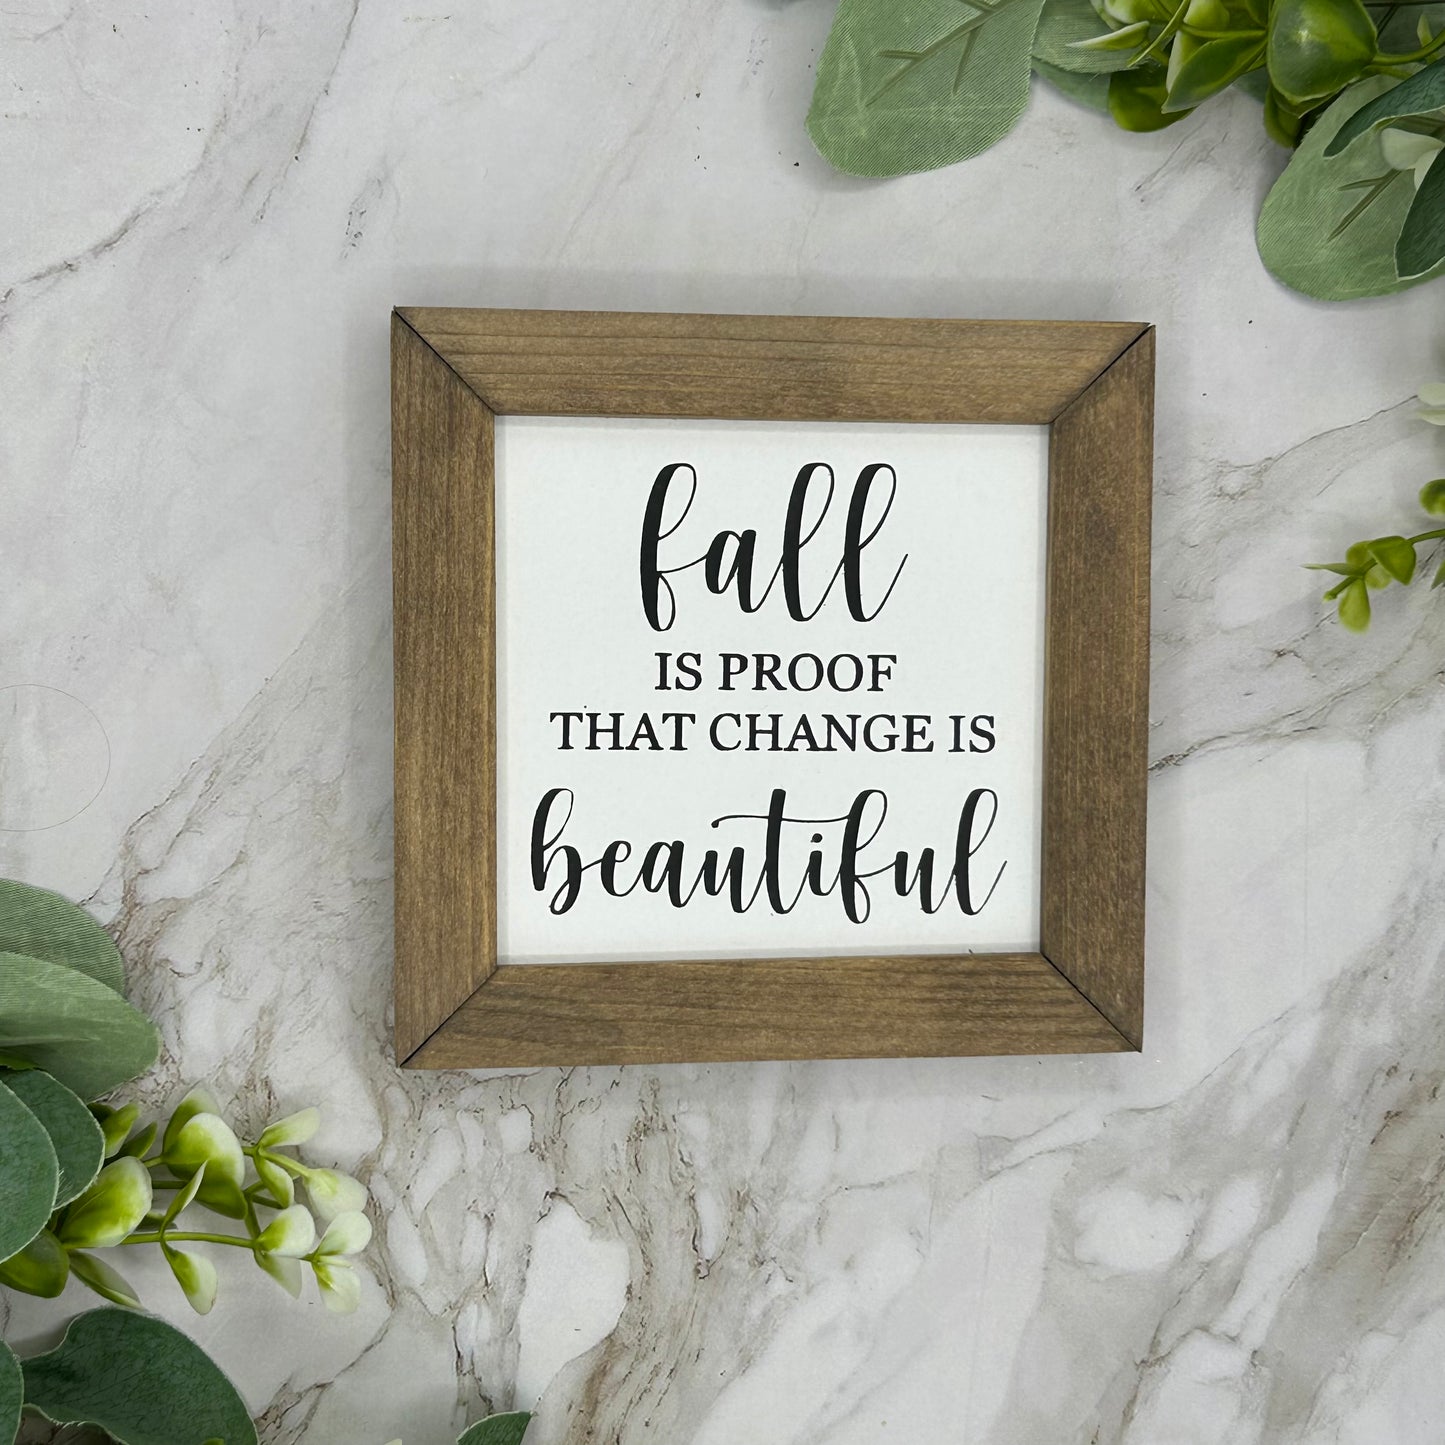 Double Sided Small Fall Framed Sign